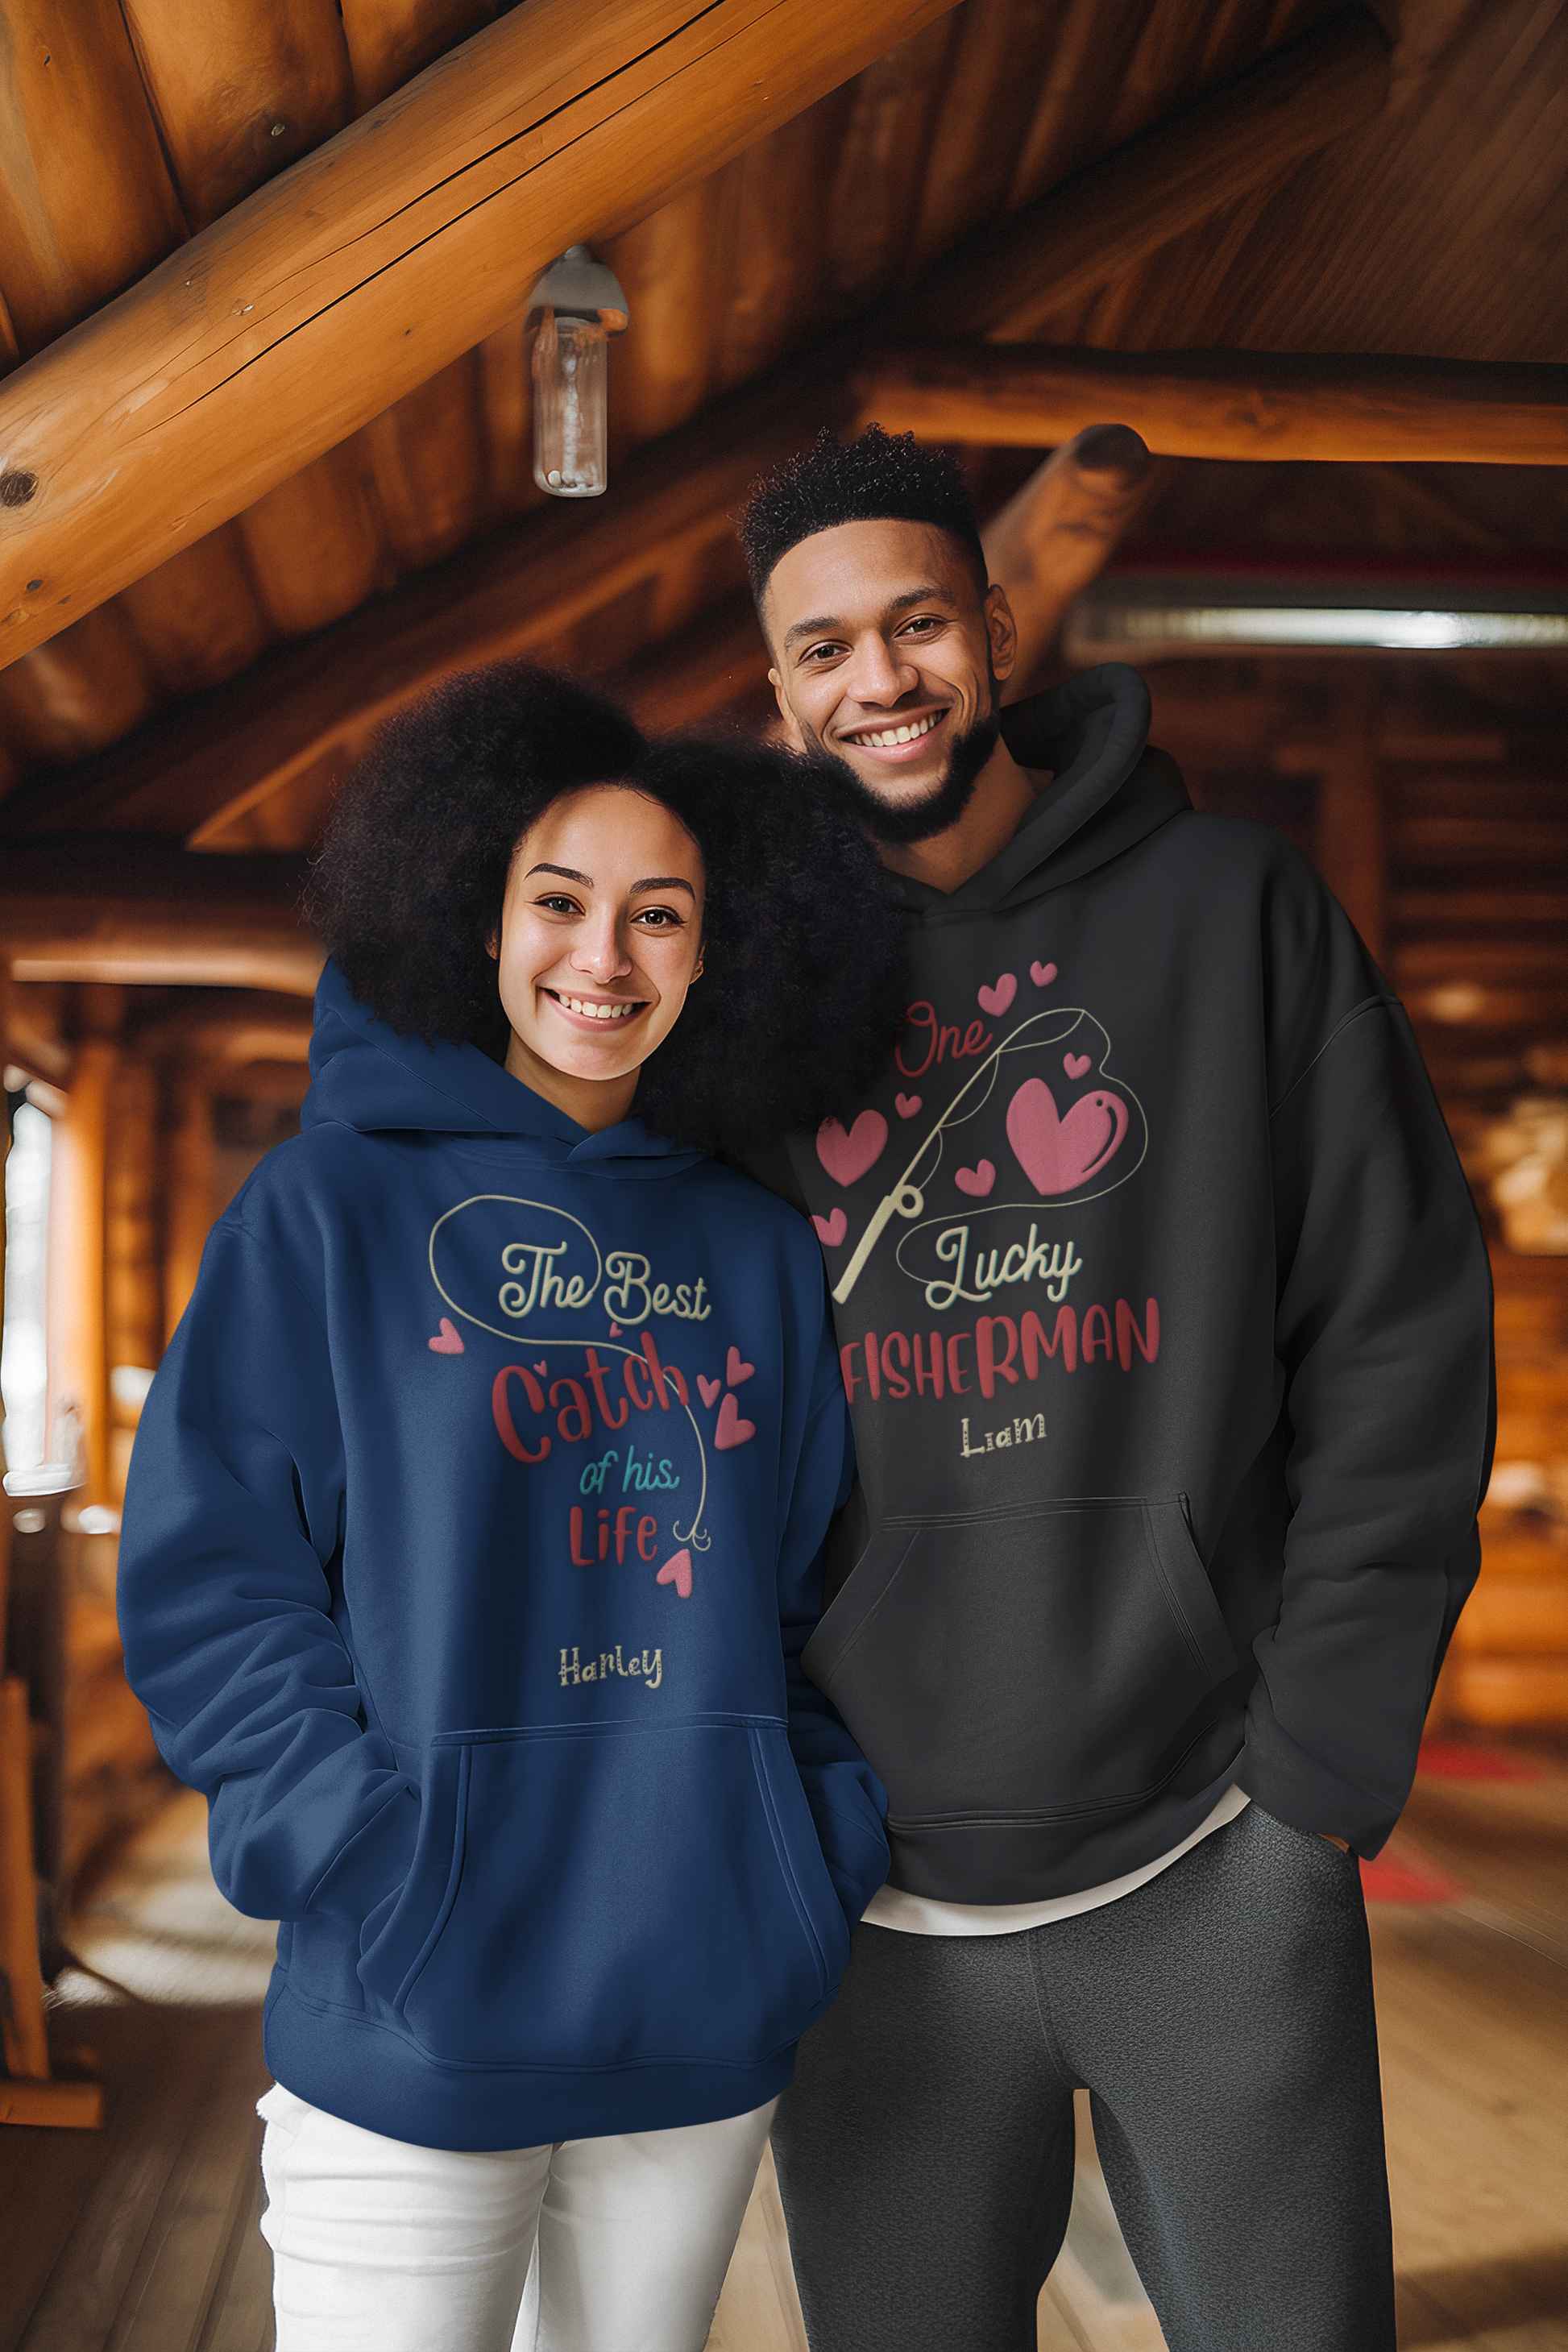 One Lucky Fisherman Best Catch of His Life - Matching Embroidered Shirts For Couples - Valentine's day gifts